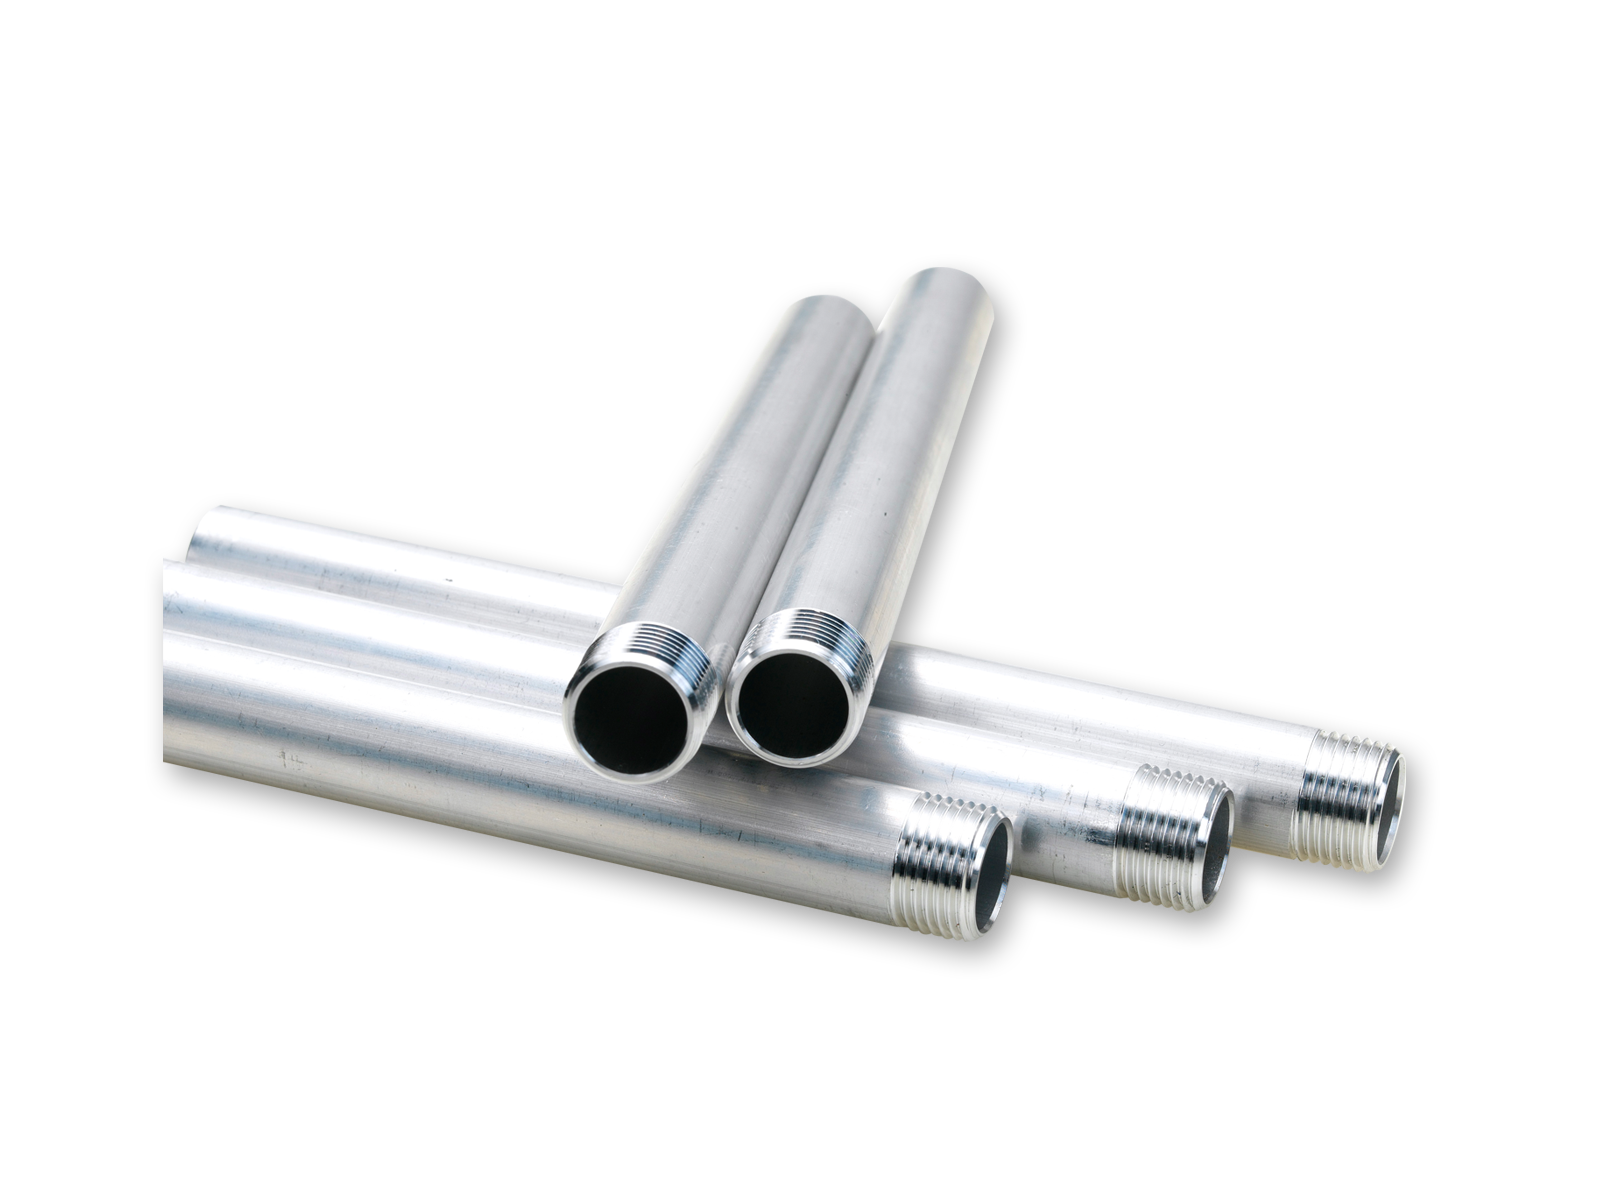 - Aluminum Tube Parts
- Smart Tailgate System
- Machining & Tapping
- 1,000,000pcs/yr Capacity